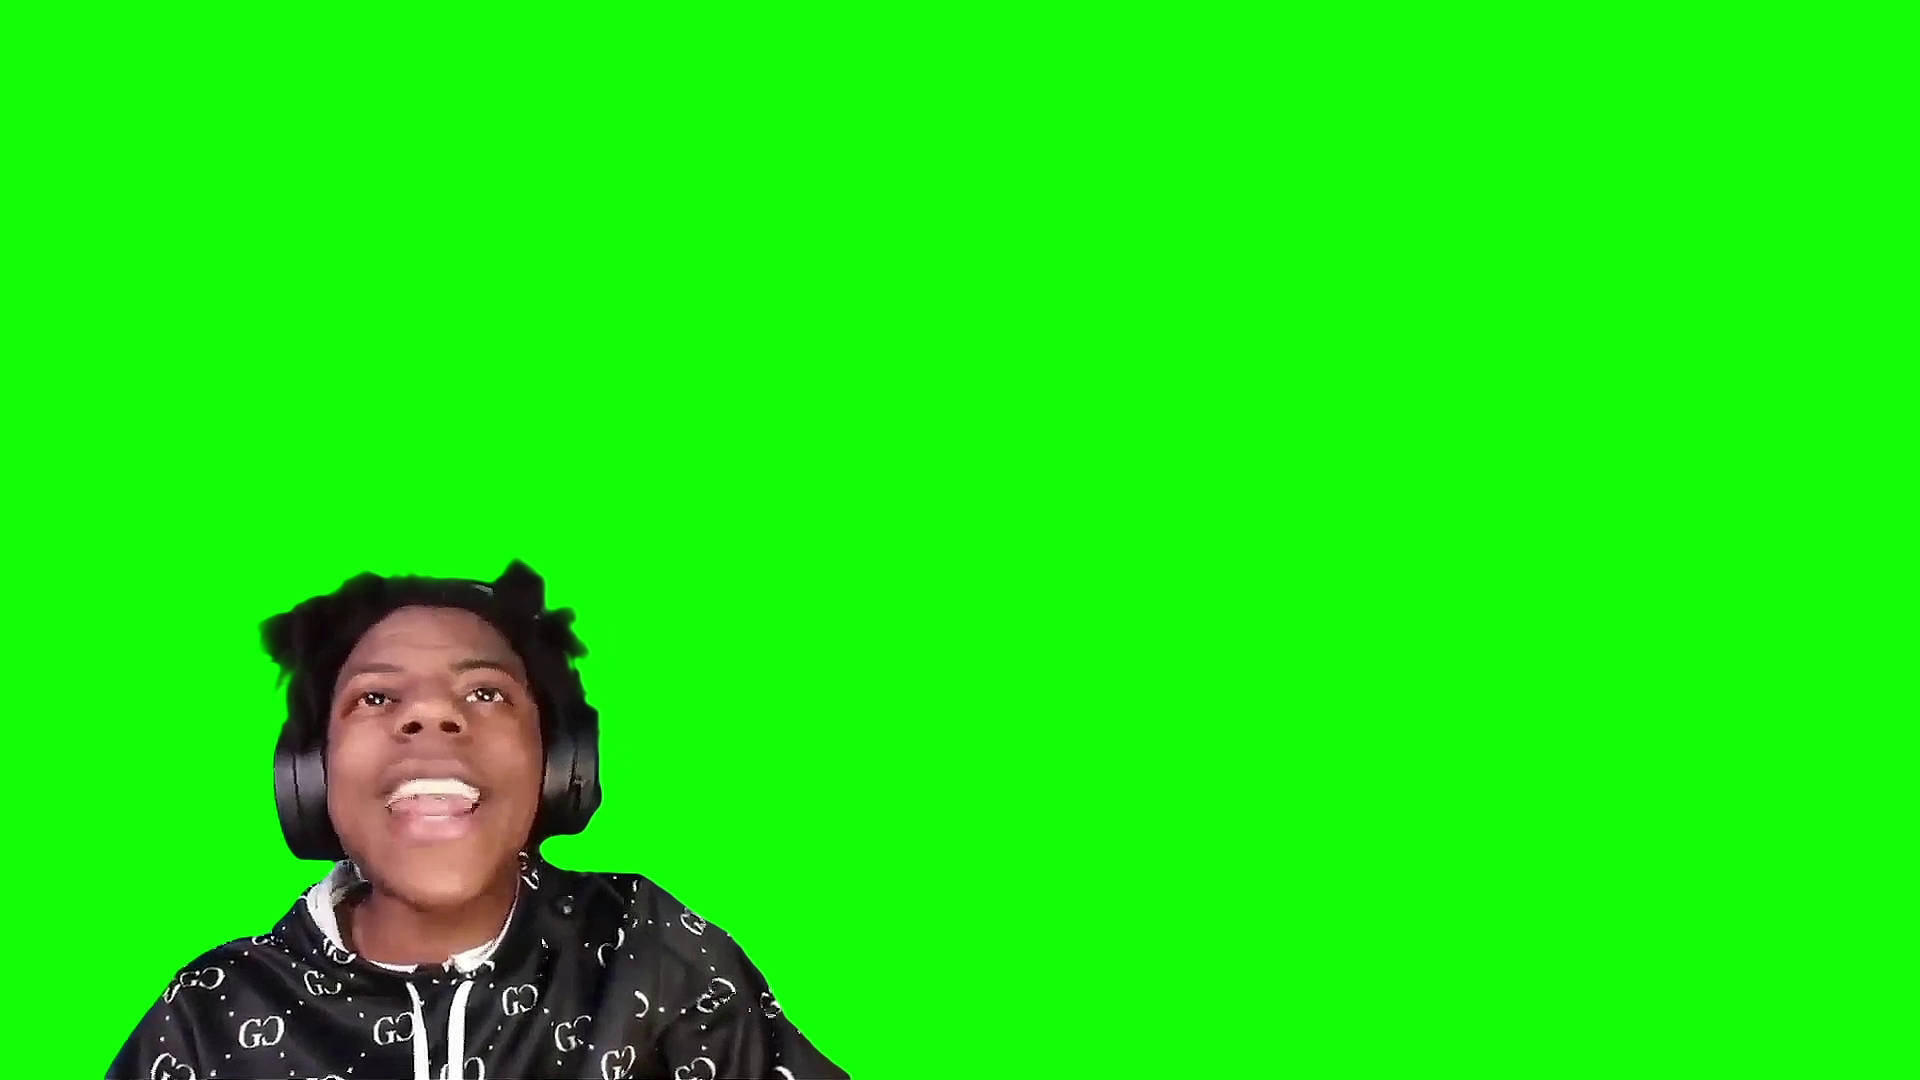 Ishowspeed In Green Screen Background